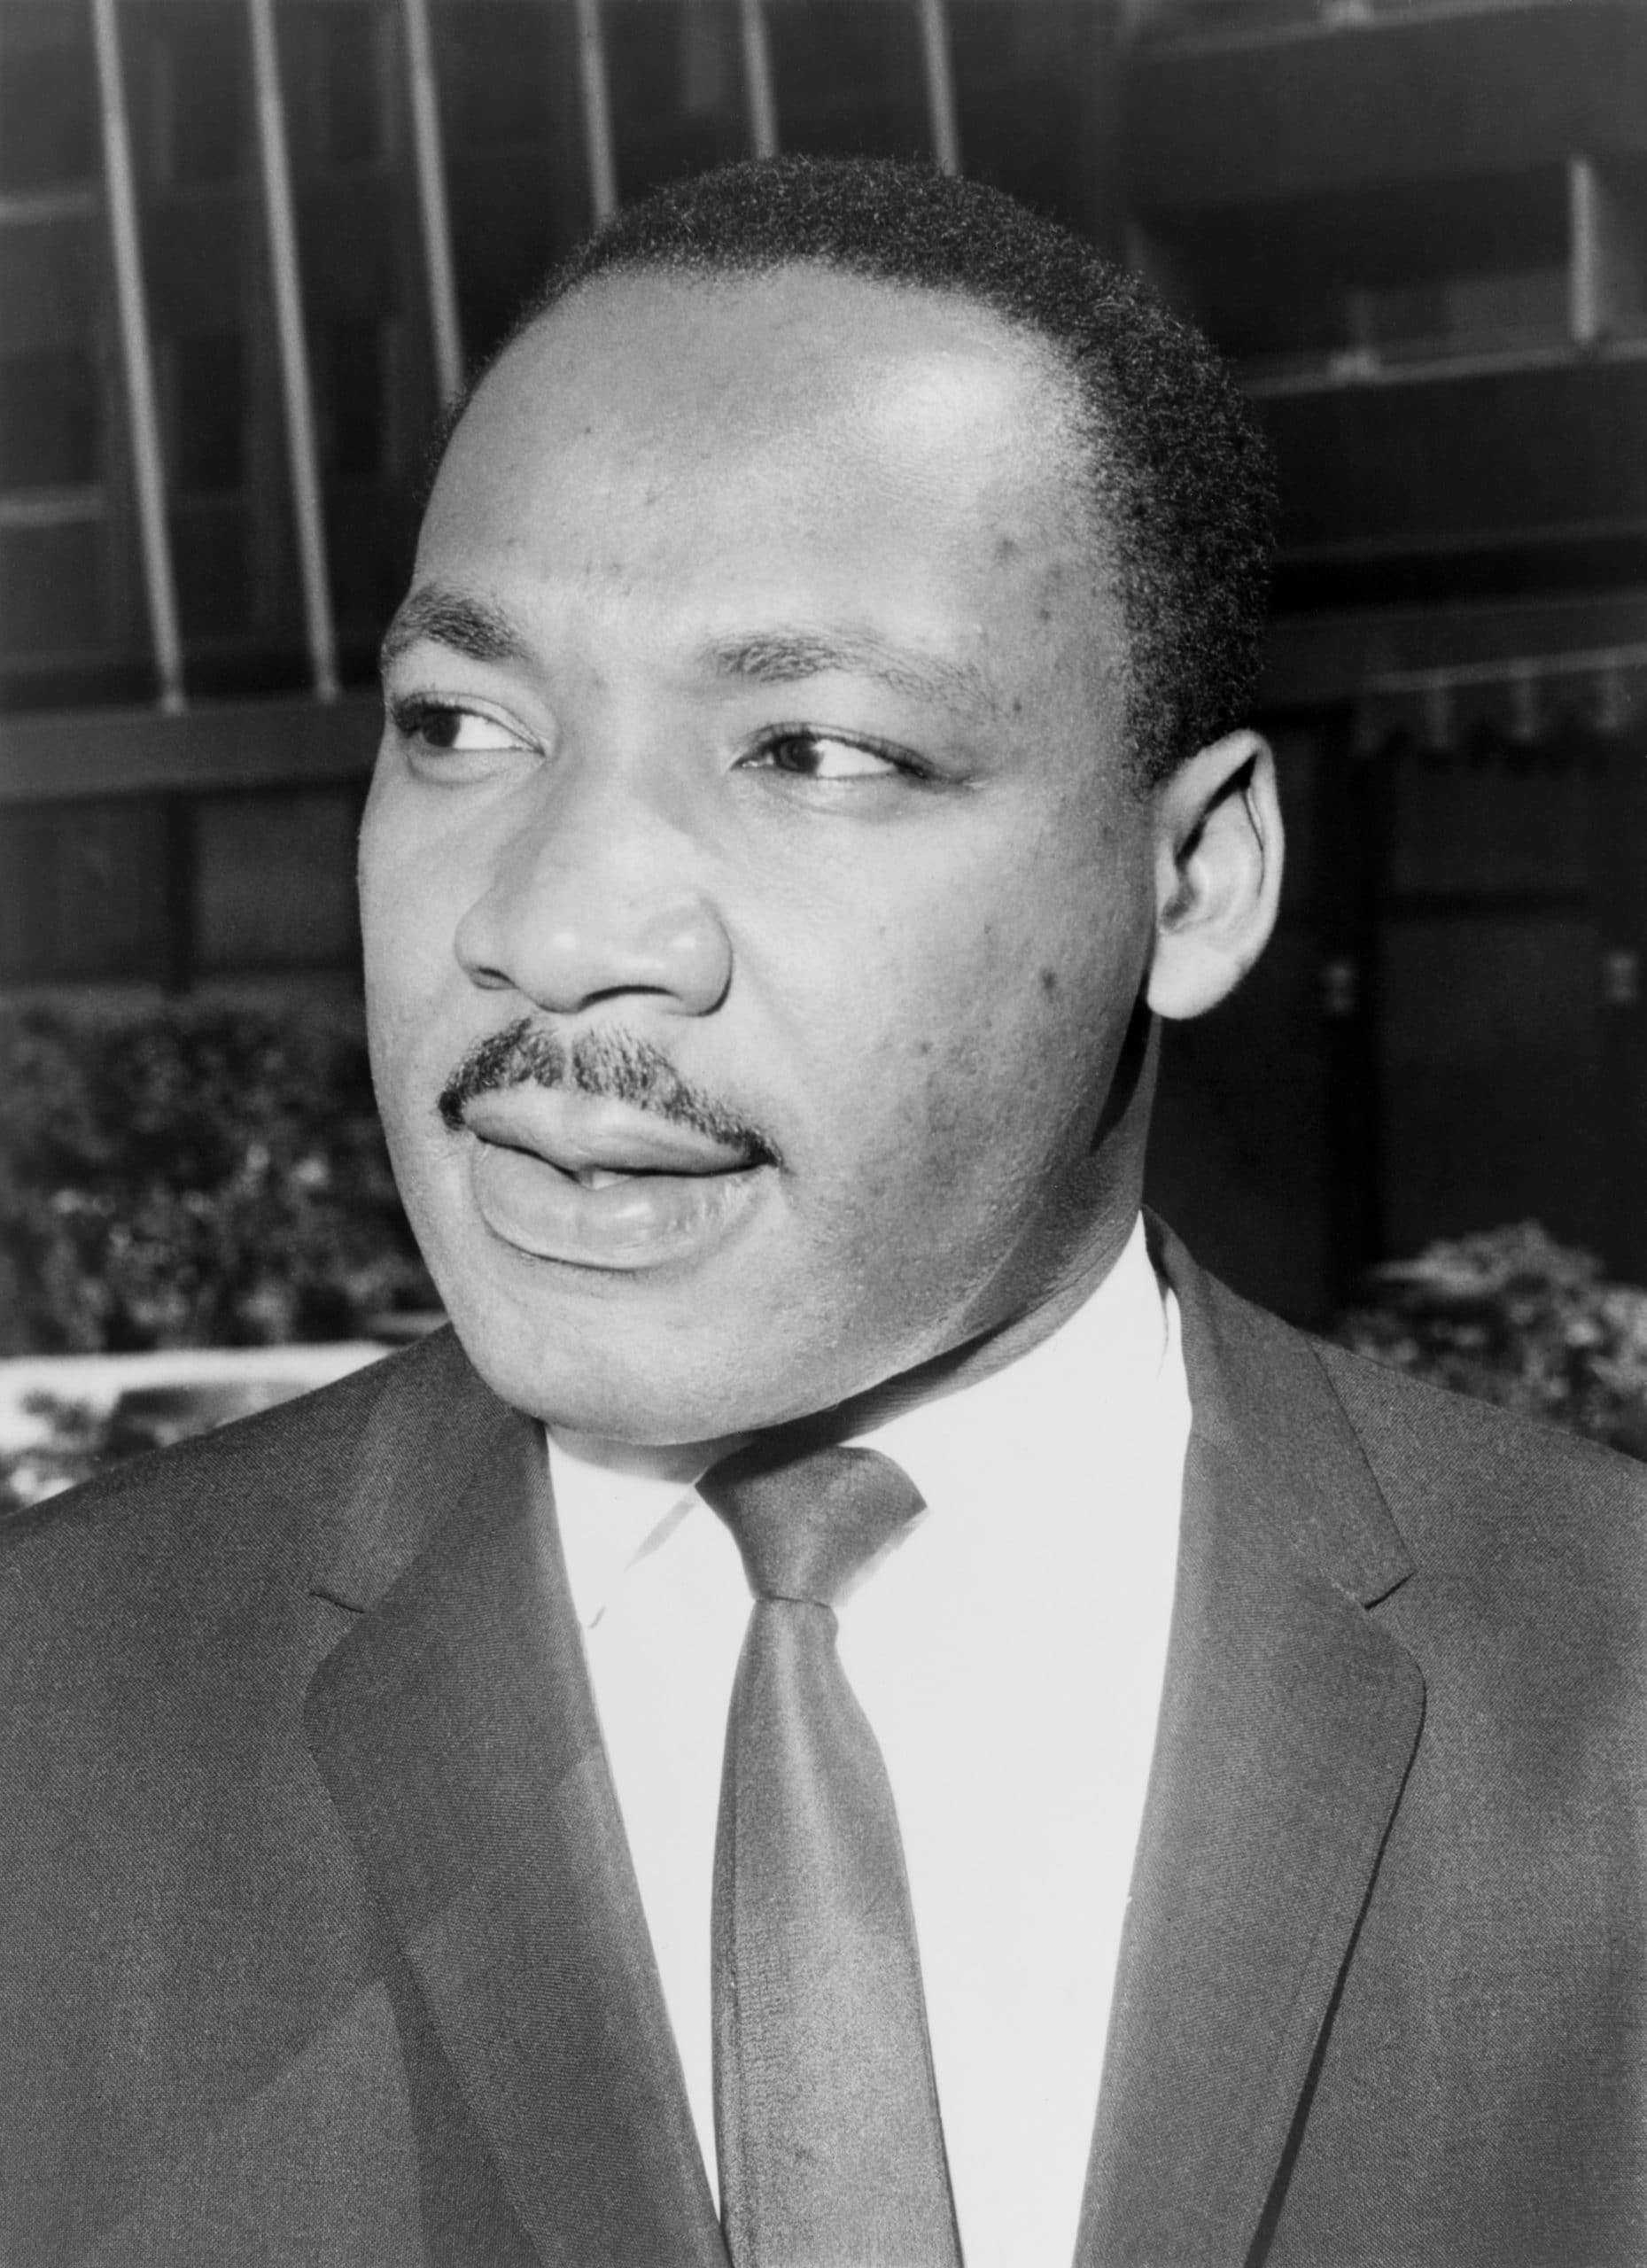 Martin Luther King, Jr., Leader of the Southern Christian Leadership Conference, a Civil Rights Organization. Oct. 14, 1964